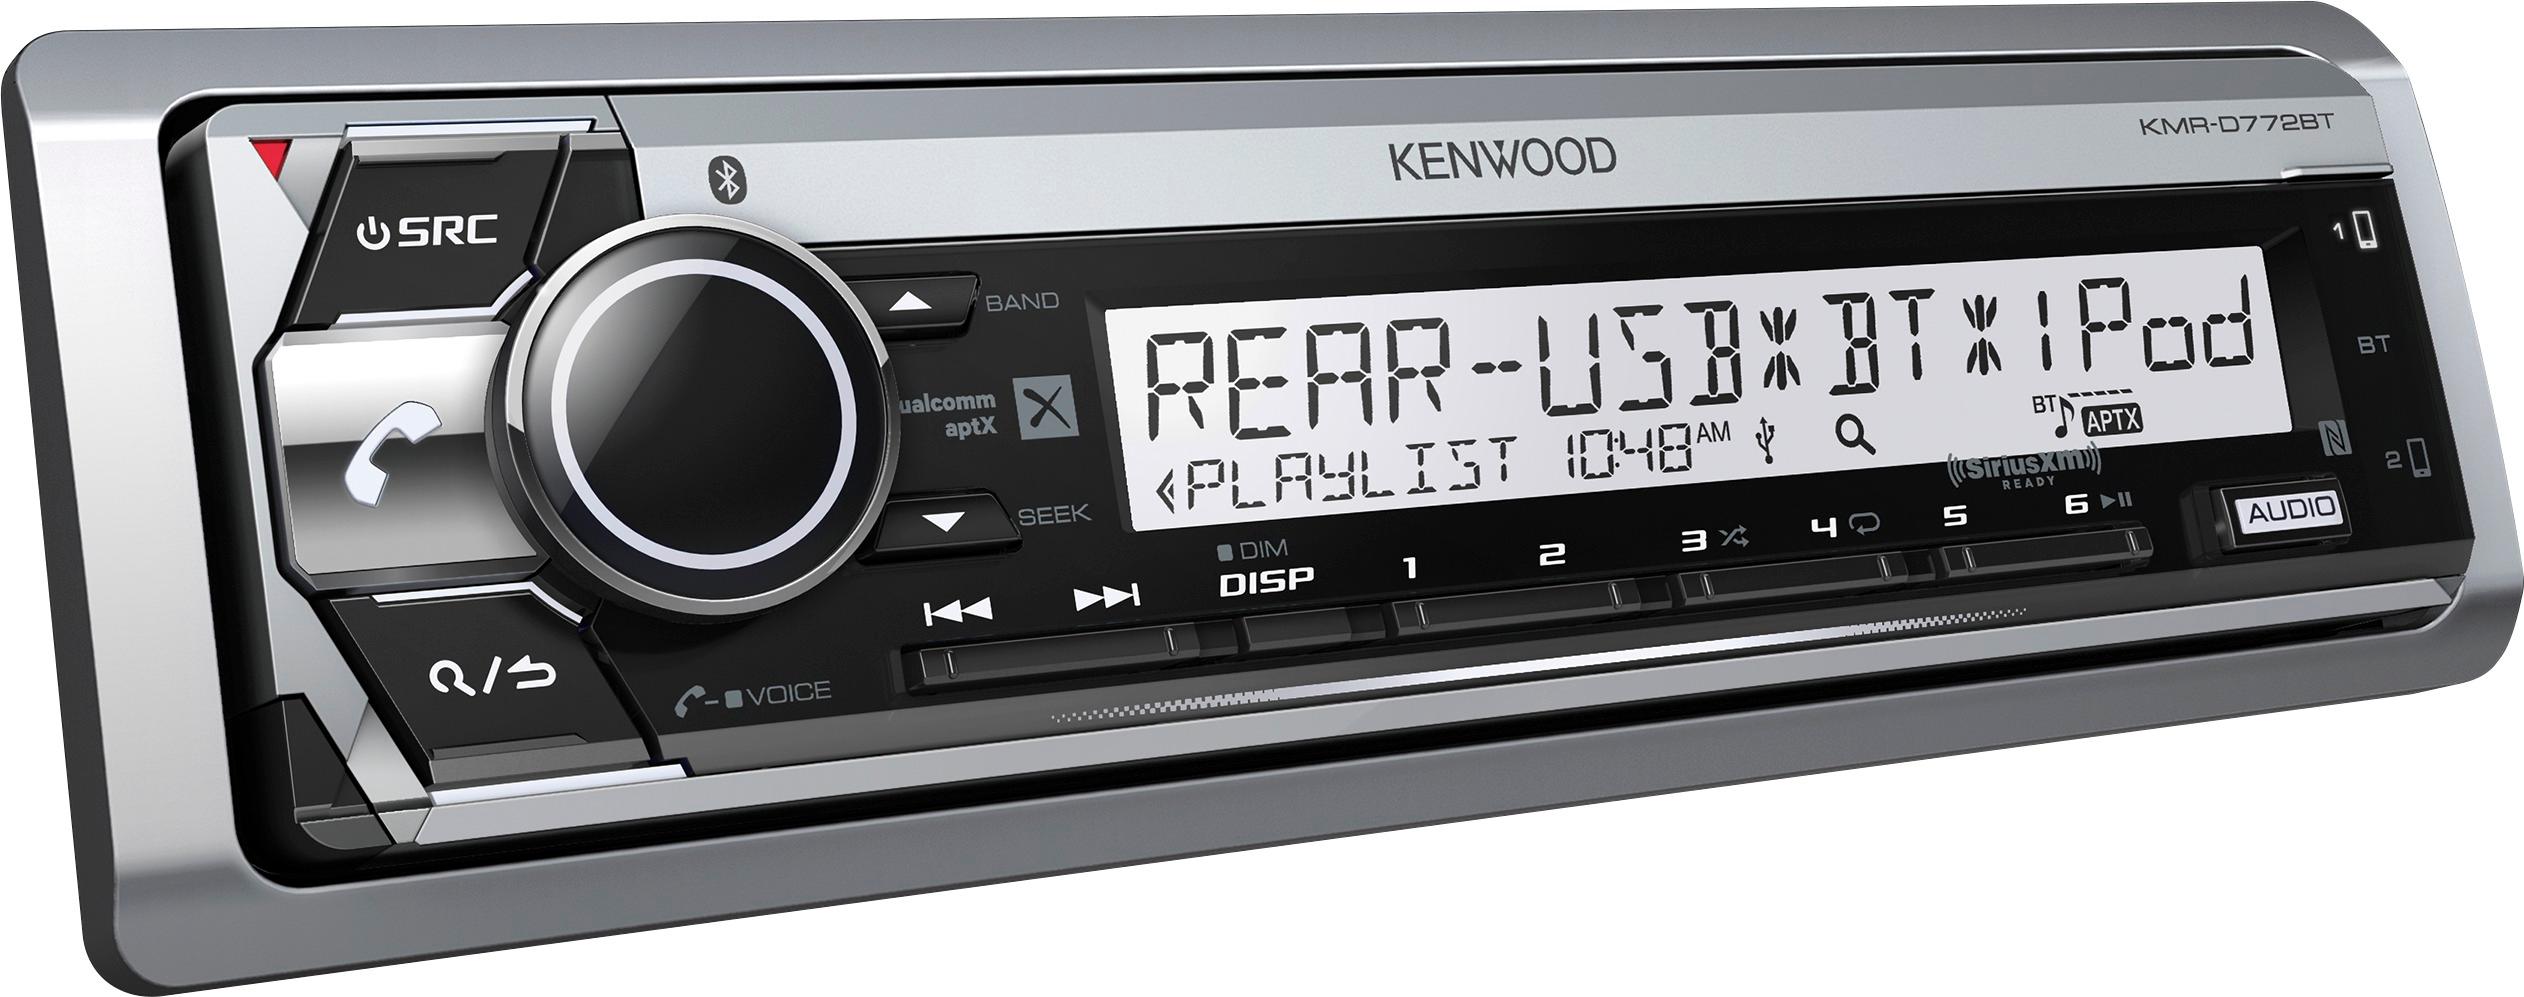 Angle View: KENWOOD KMR-D772BT Marine Single-DIN In-Dash CD Receiver with Bluetooth and SiriusXM Ready